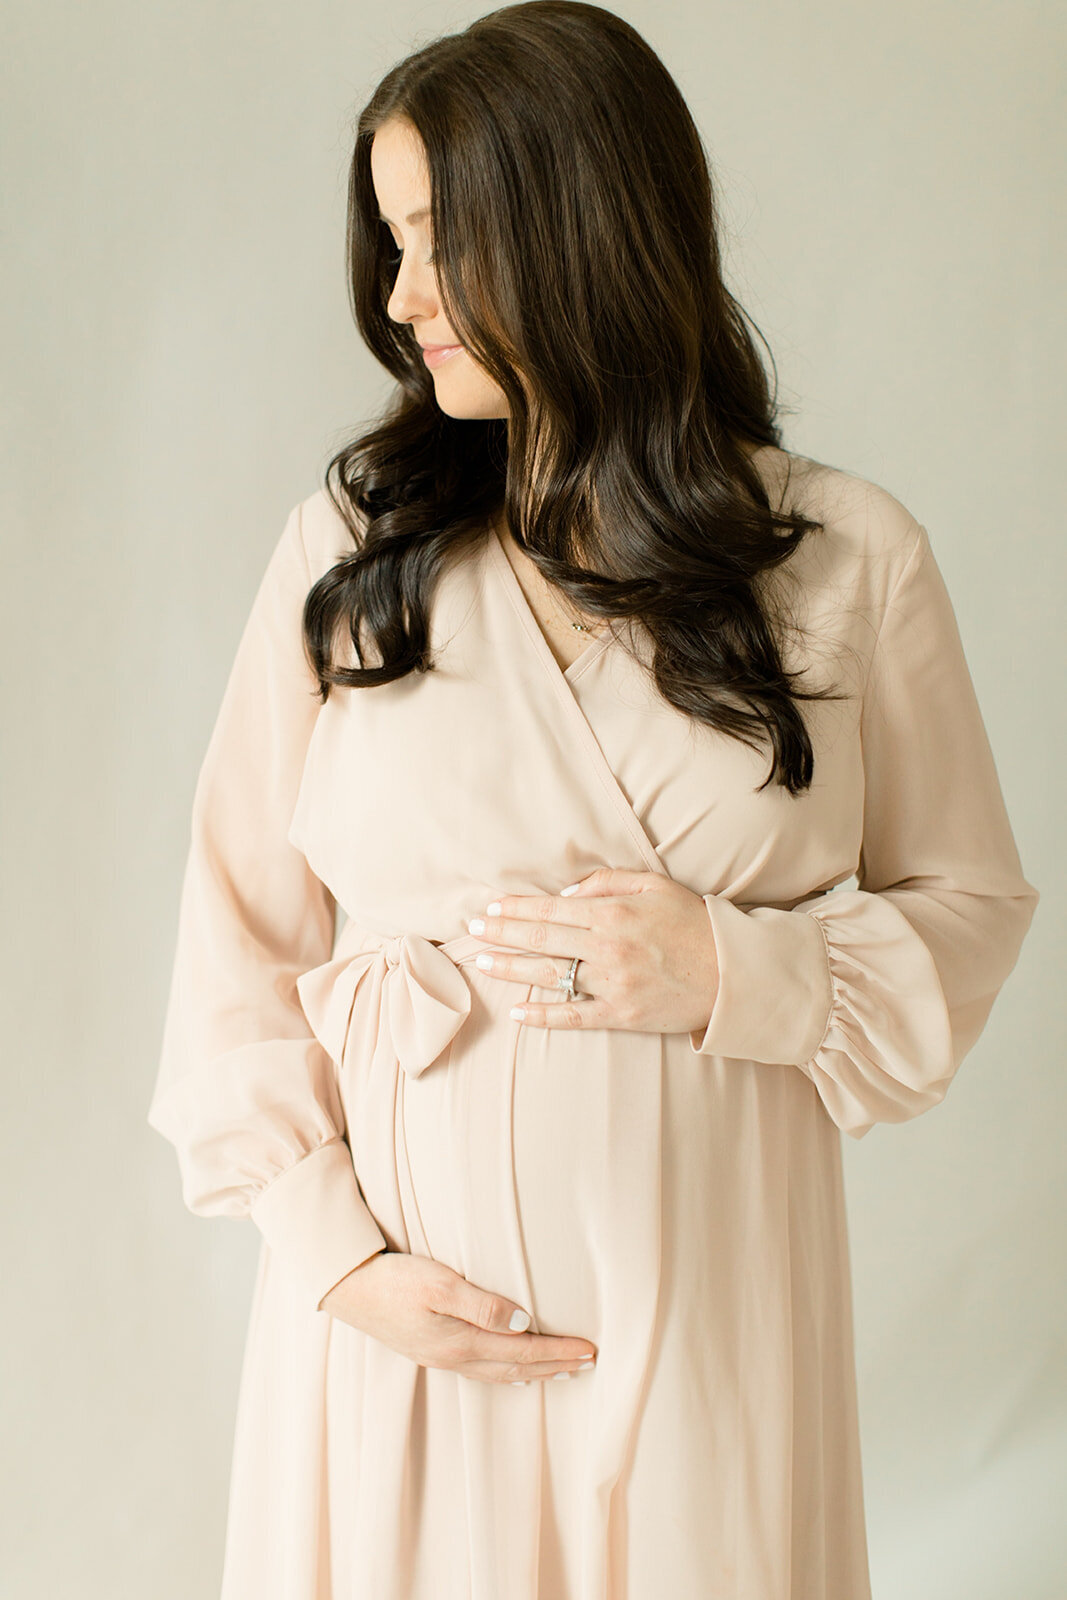 Shea-Gibson-Mississippi-Photographer-Roberts Maternity_-74